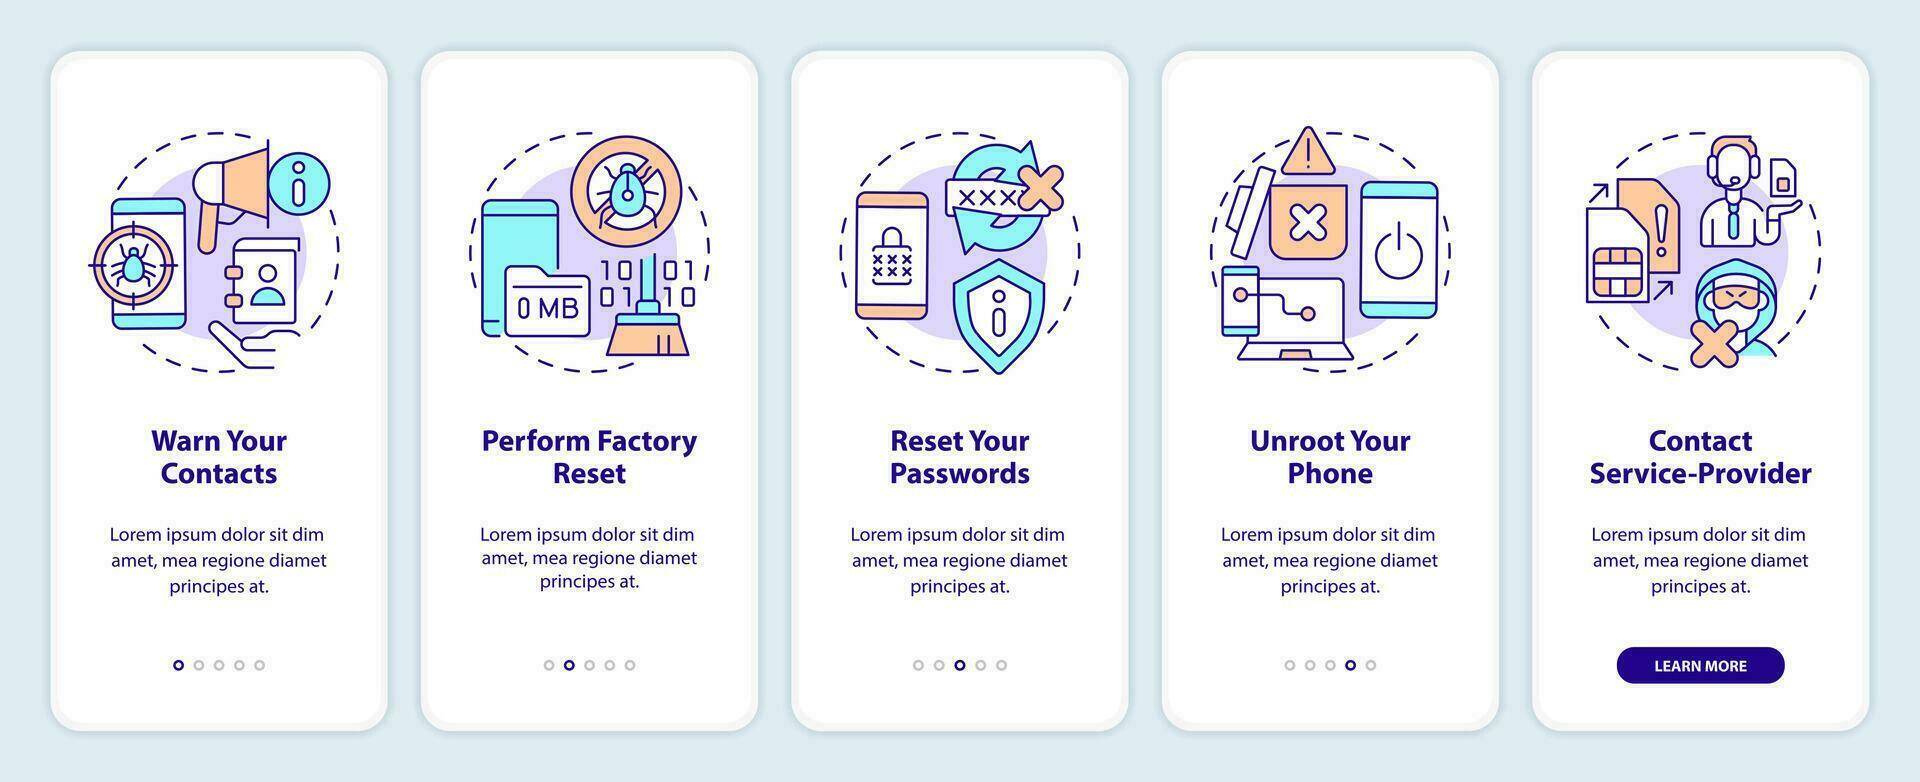 Fix hacked smartphone tips onboarding mobile app screen. Cybersecurity walkthrough 5 steps editable graphic instructions with linear concepts. UI, UX, GUI template vector